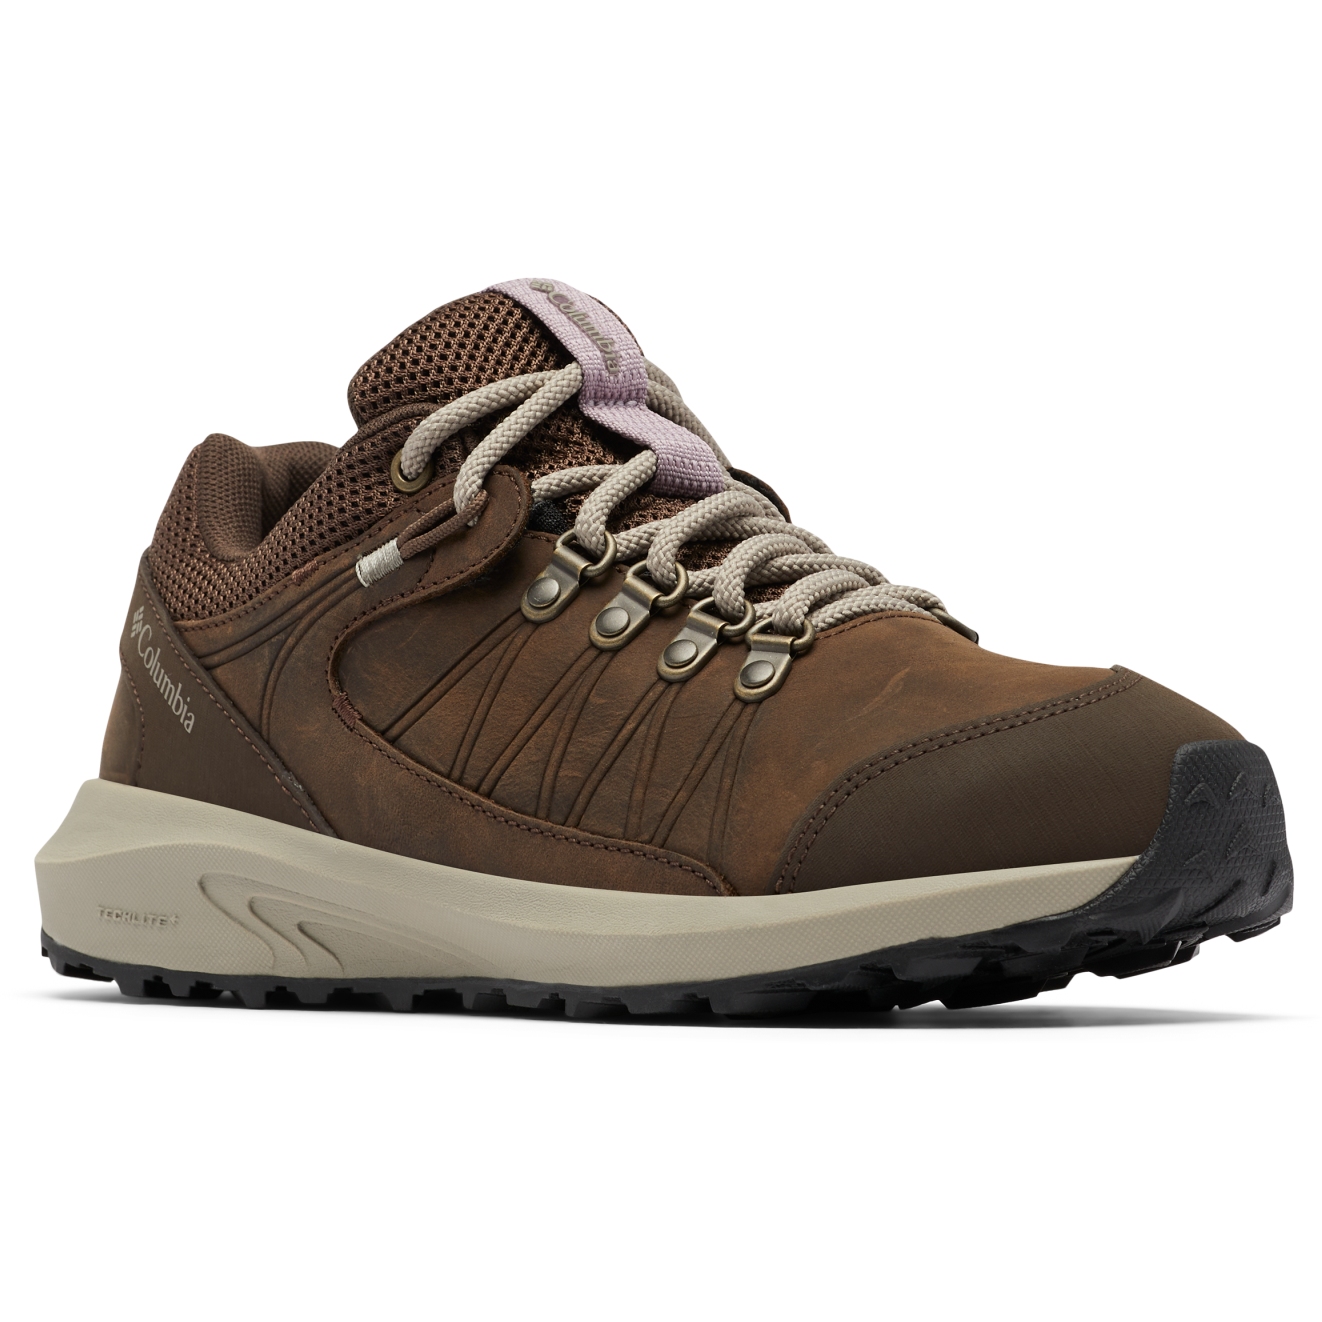 Picture of Columbia Trailstorm Crest Waterproof Hiking Shoes Women - Cordovan, Kettle